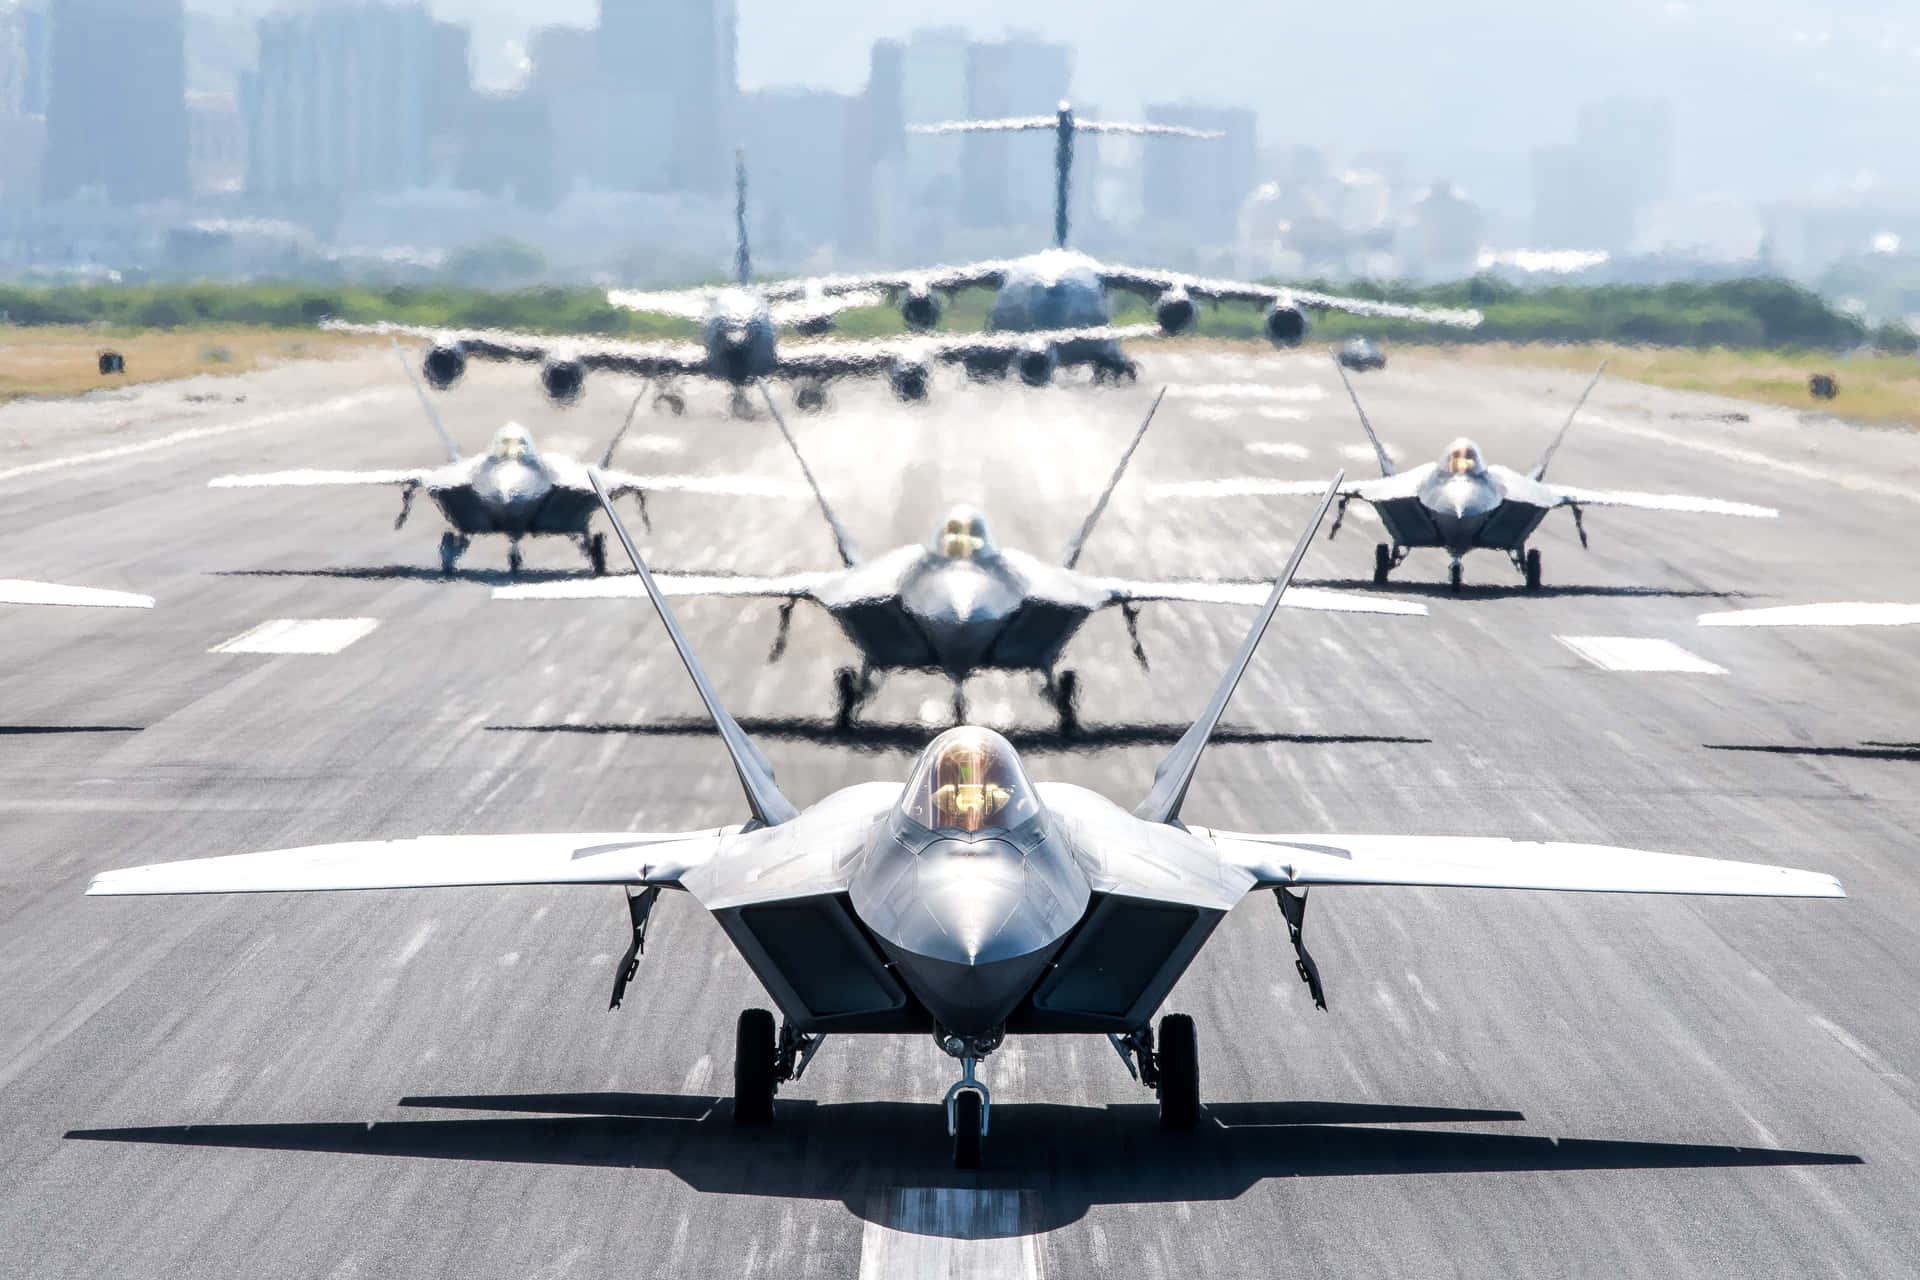 A Group Of Military Jets On A Runway Wallpaper